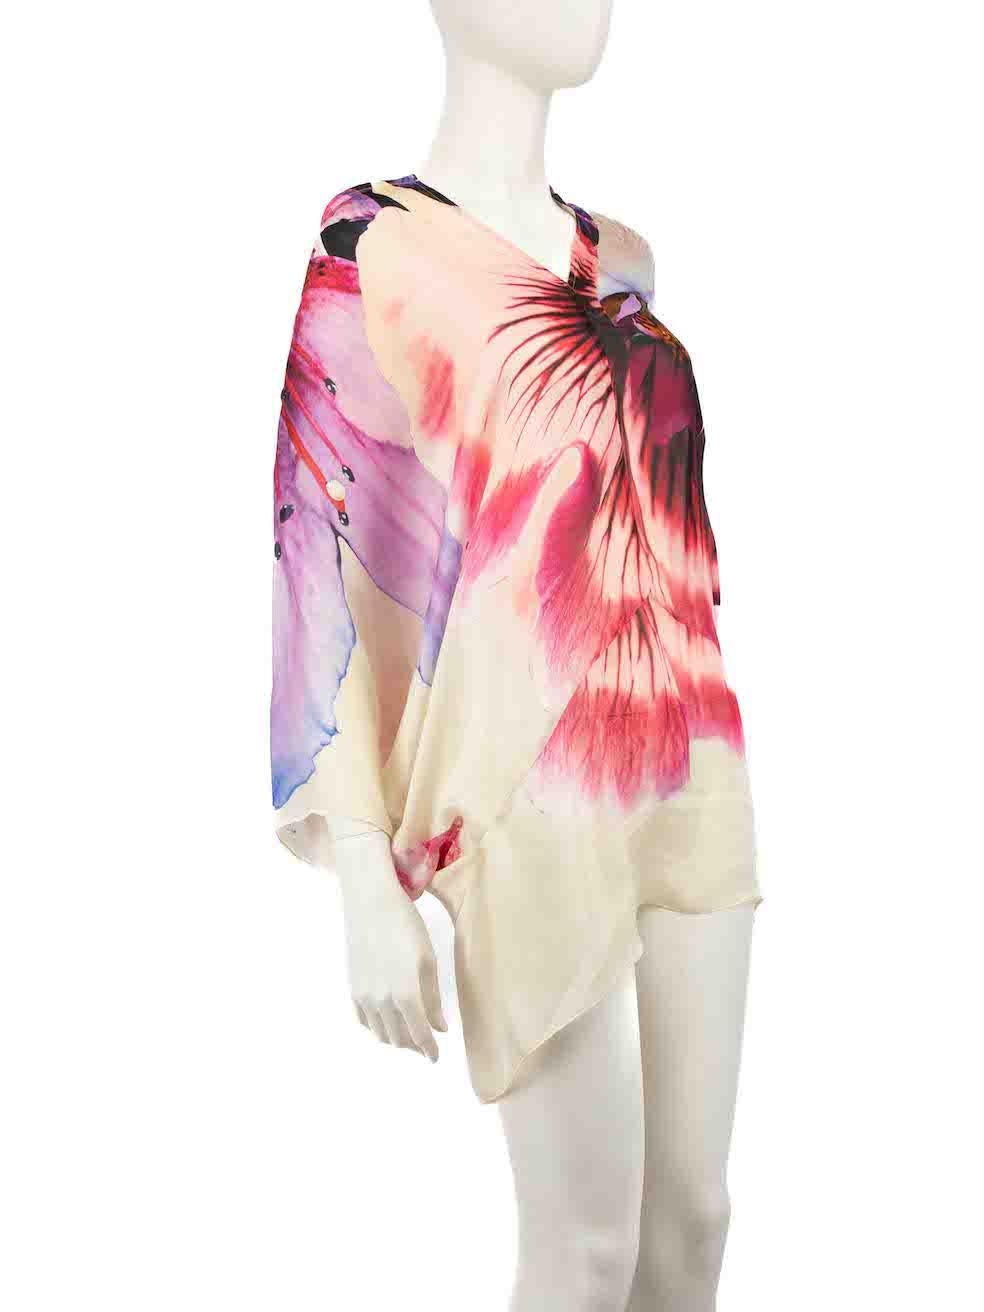 CONDITION is Good. Minor wear to dress is evident. Light pulls to the weave all over and loose thread on the front on this used Roberto Cavalli designer resale item.
 
 
 
 Details
 
 
 Multicolour- pink, purple, cream
 
 Silk
 
 Dress
 
 Floral